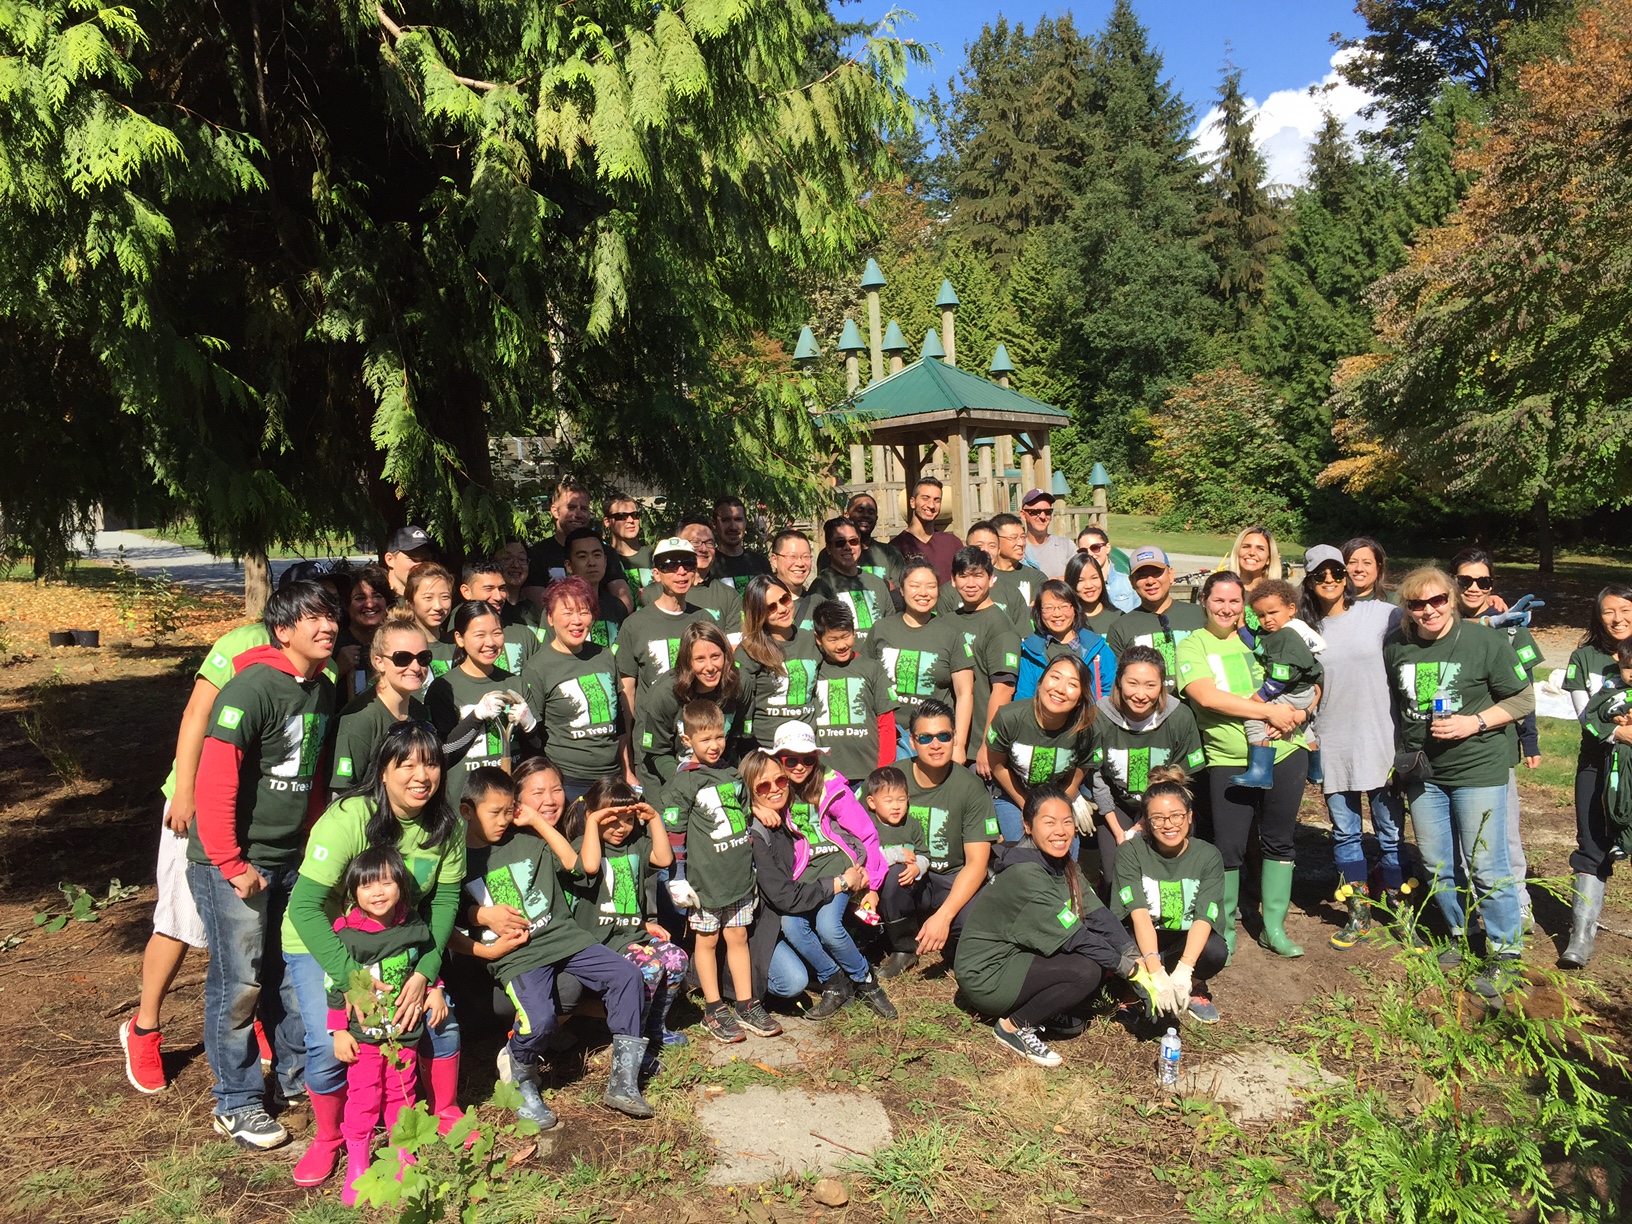 A large group of volunteers posing for a photo at a tree planting event